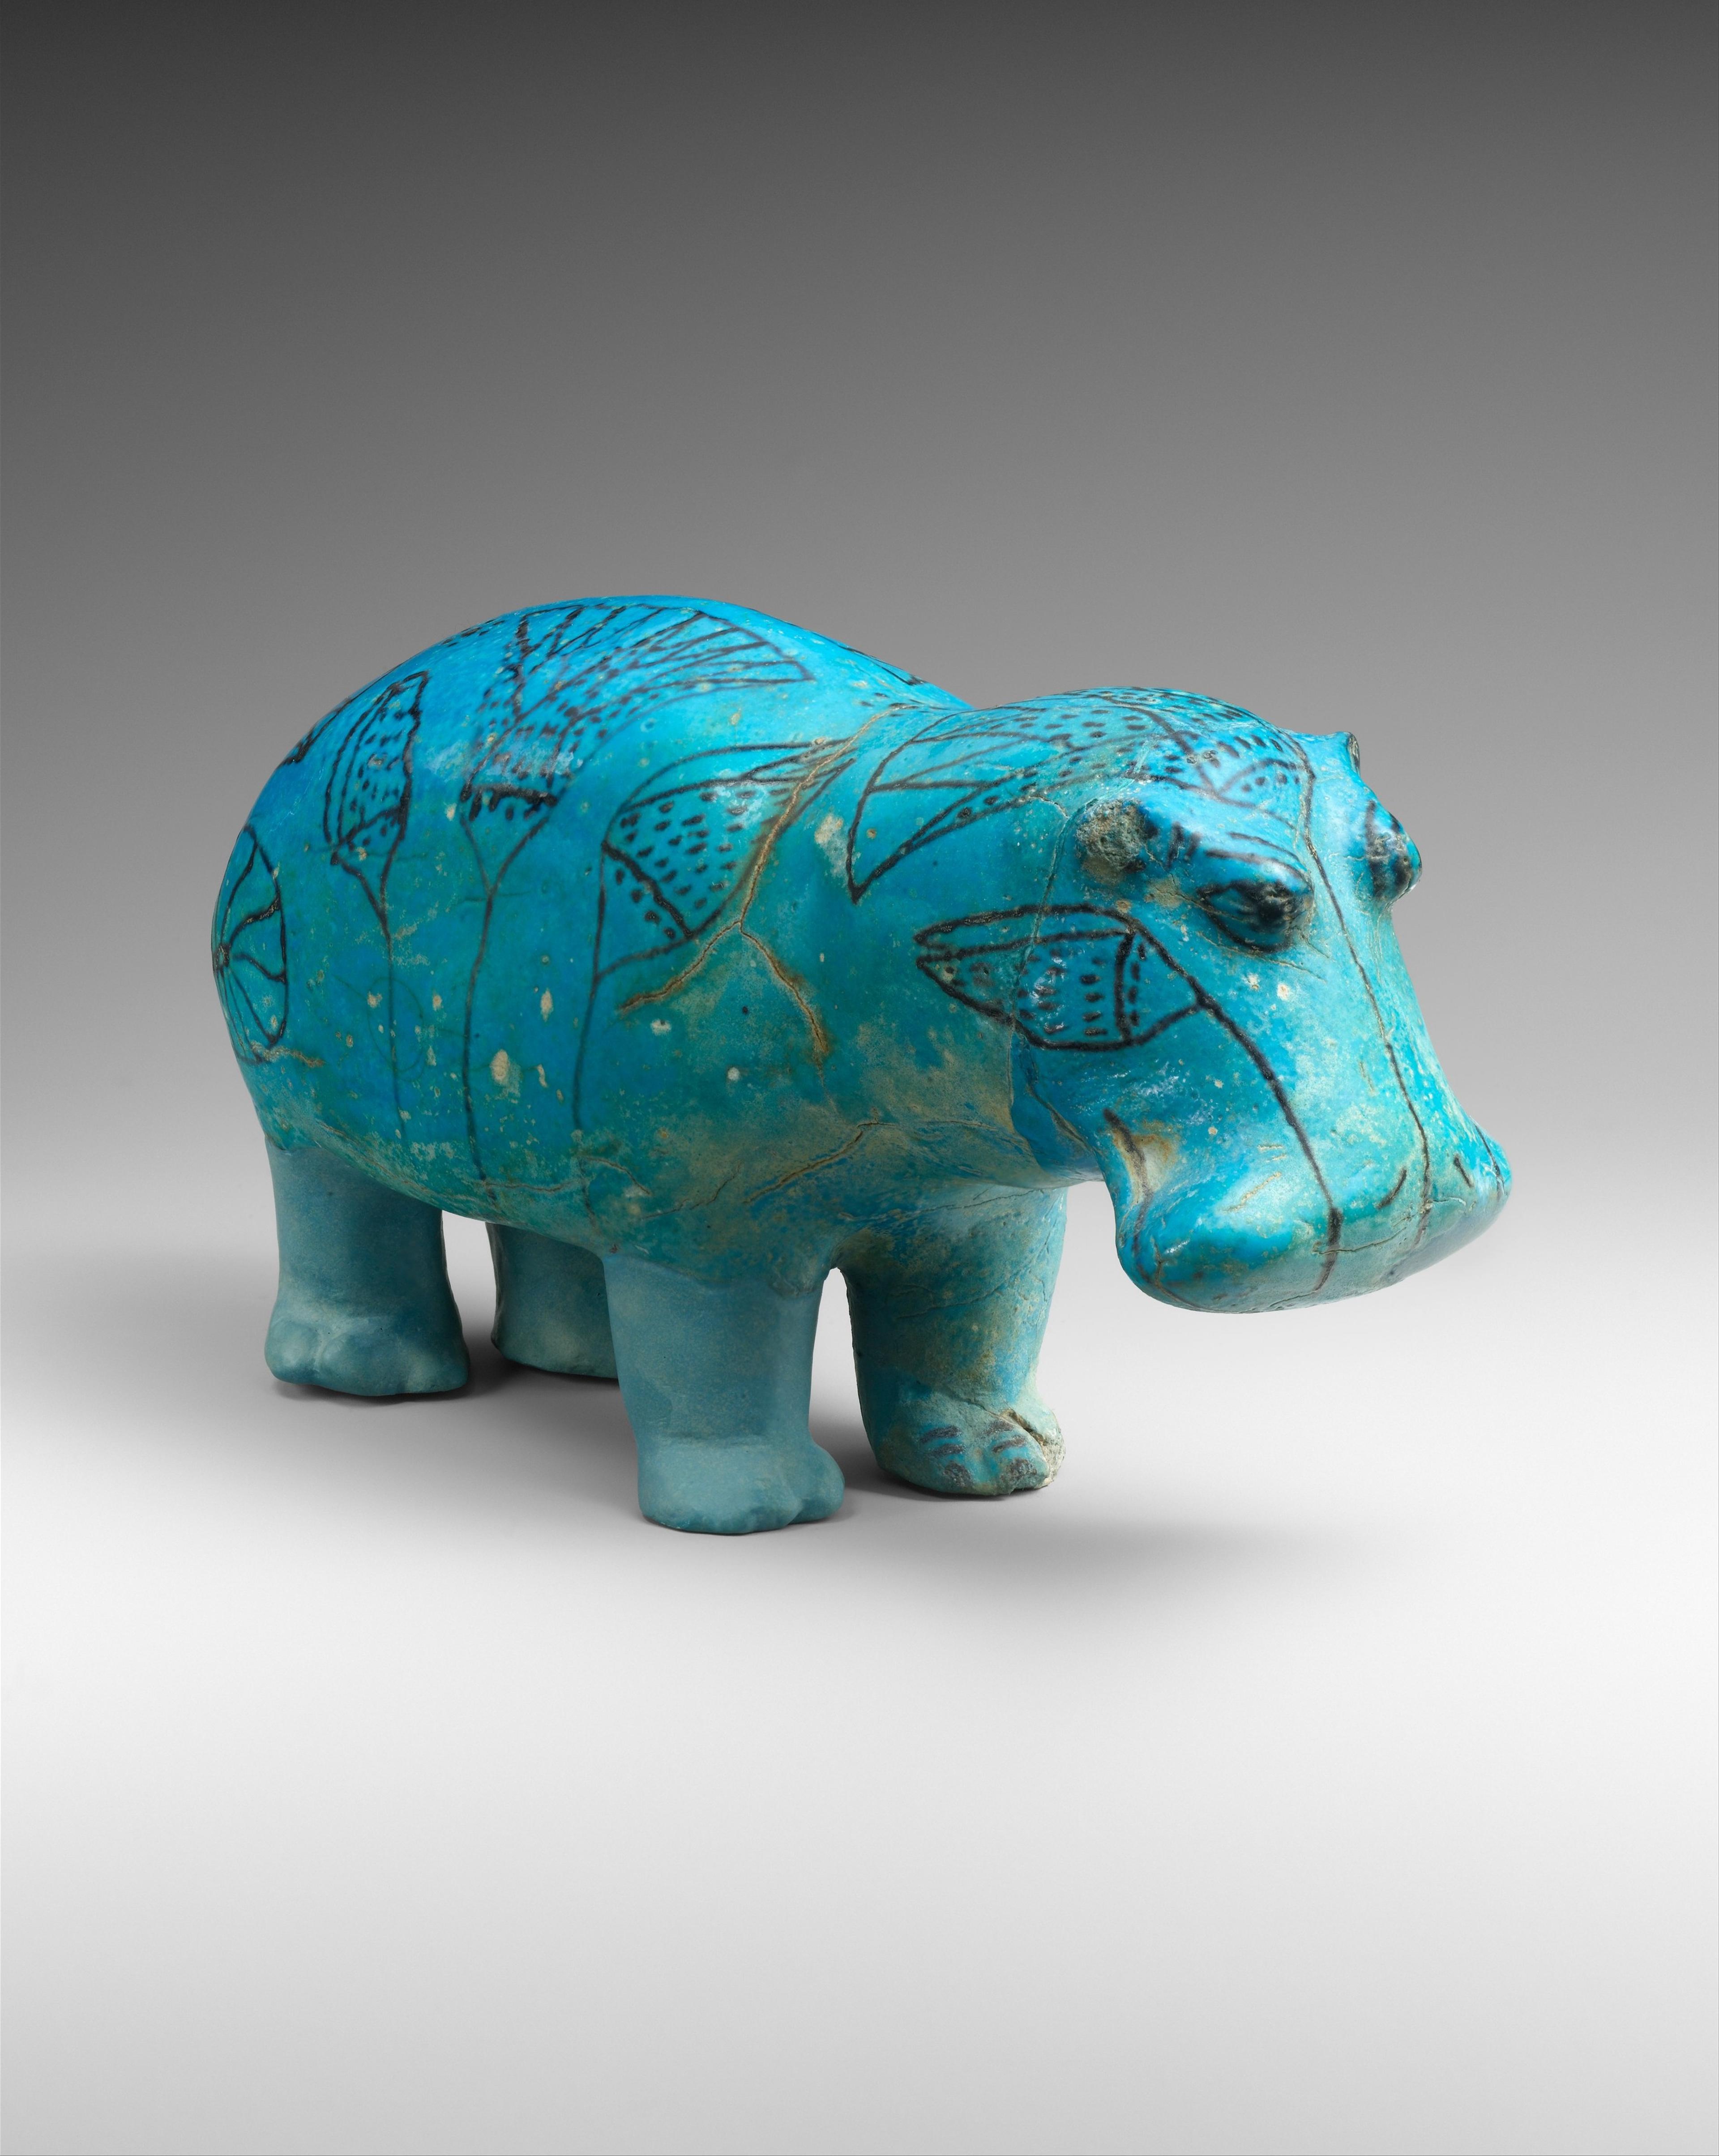 A blue hippo with lotus flower decorations painted across its surface.